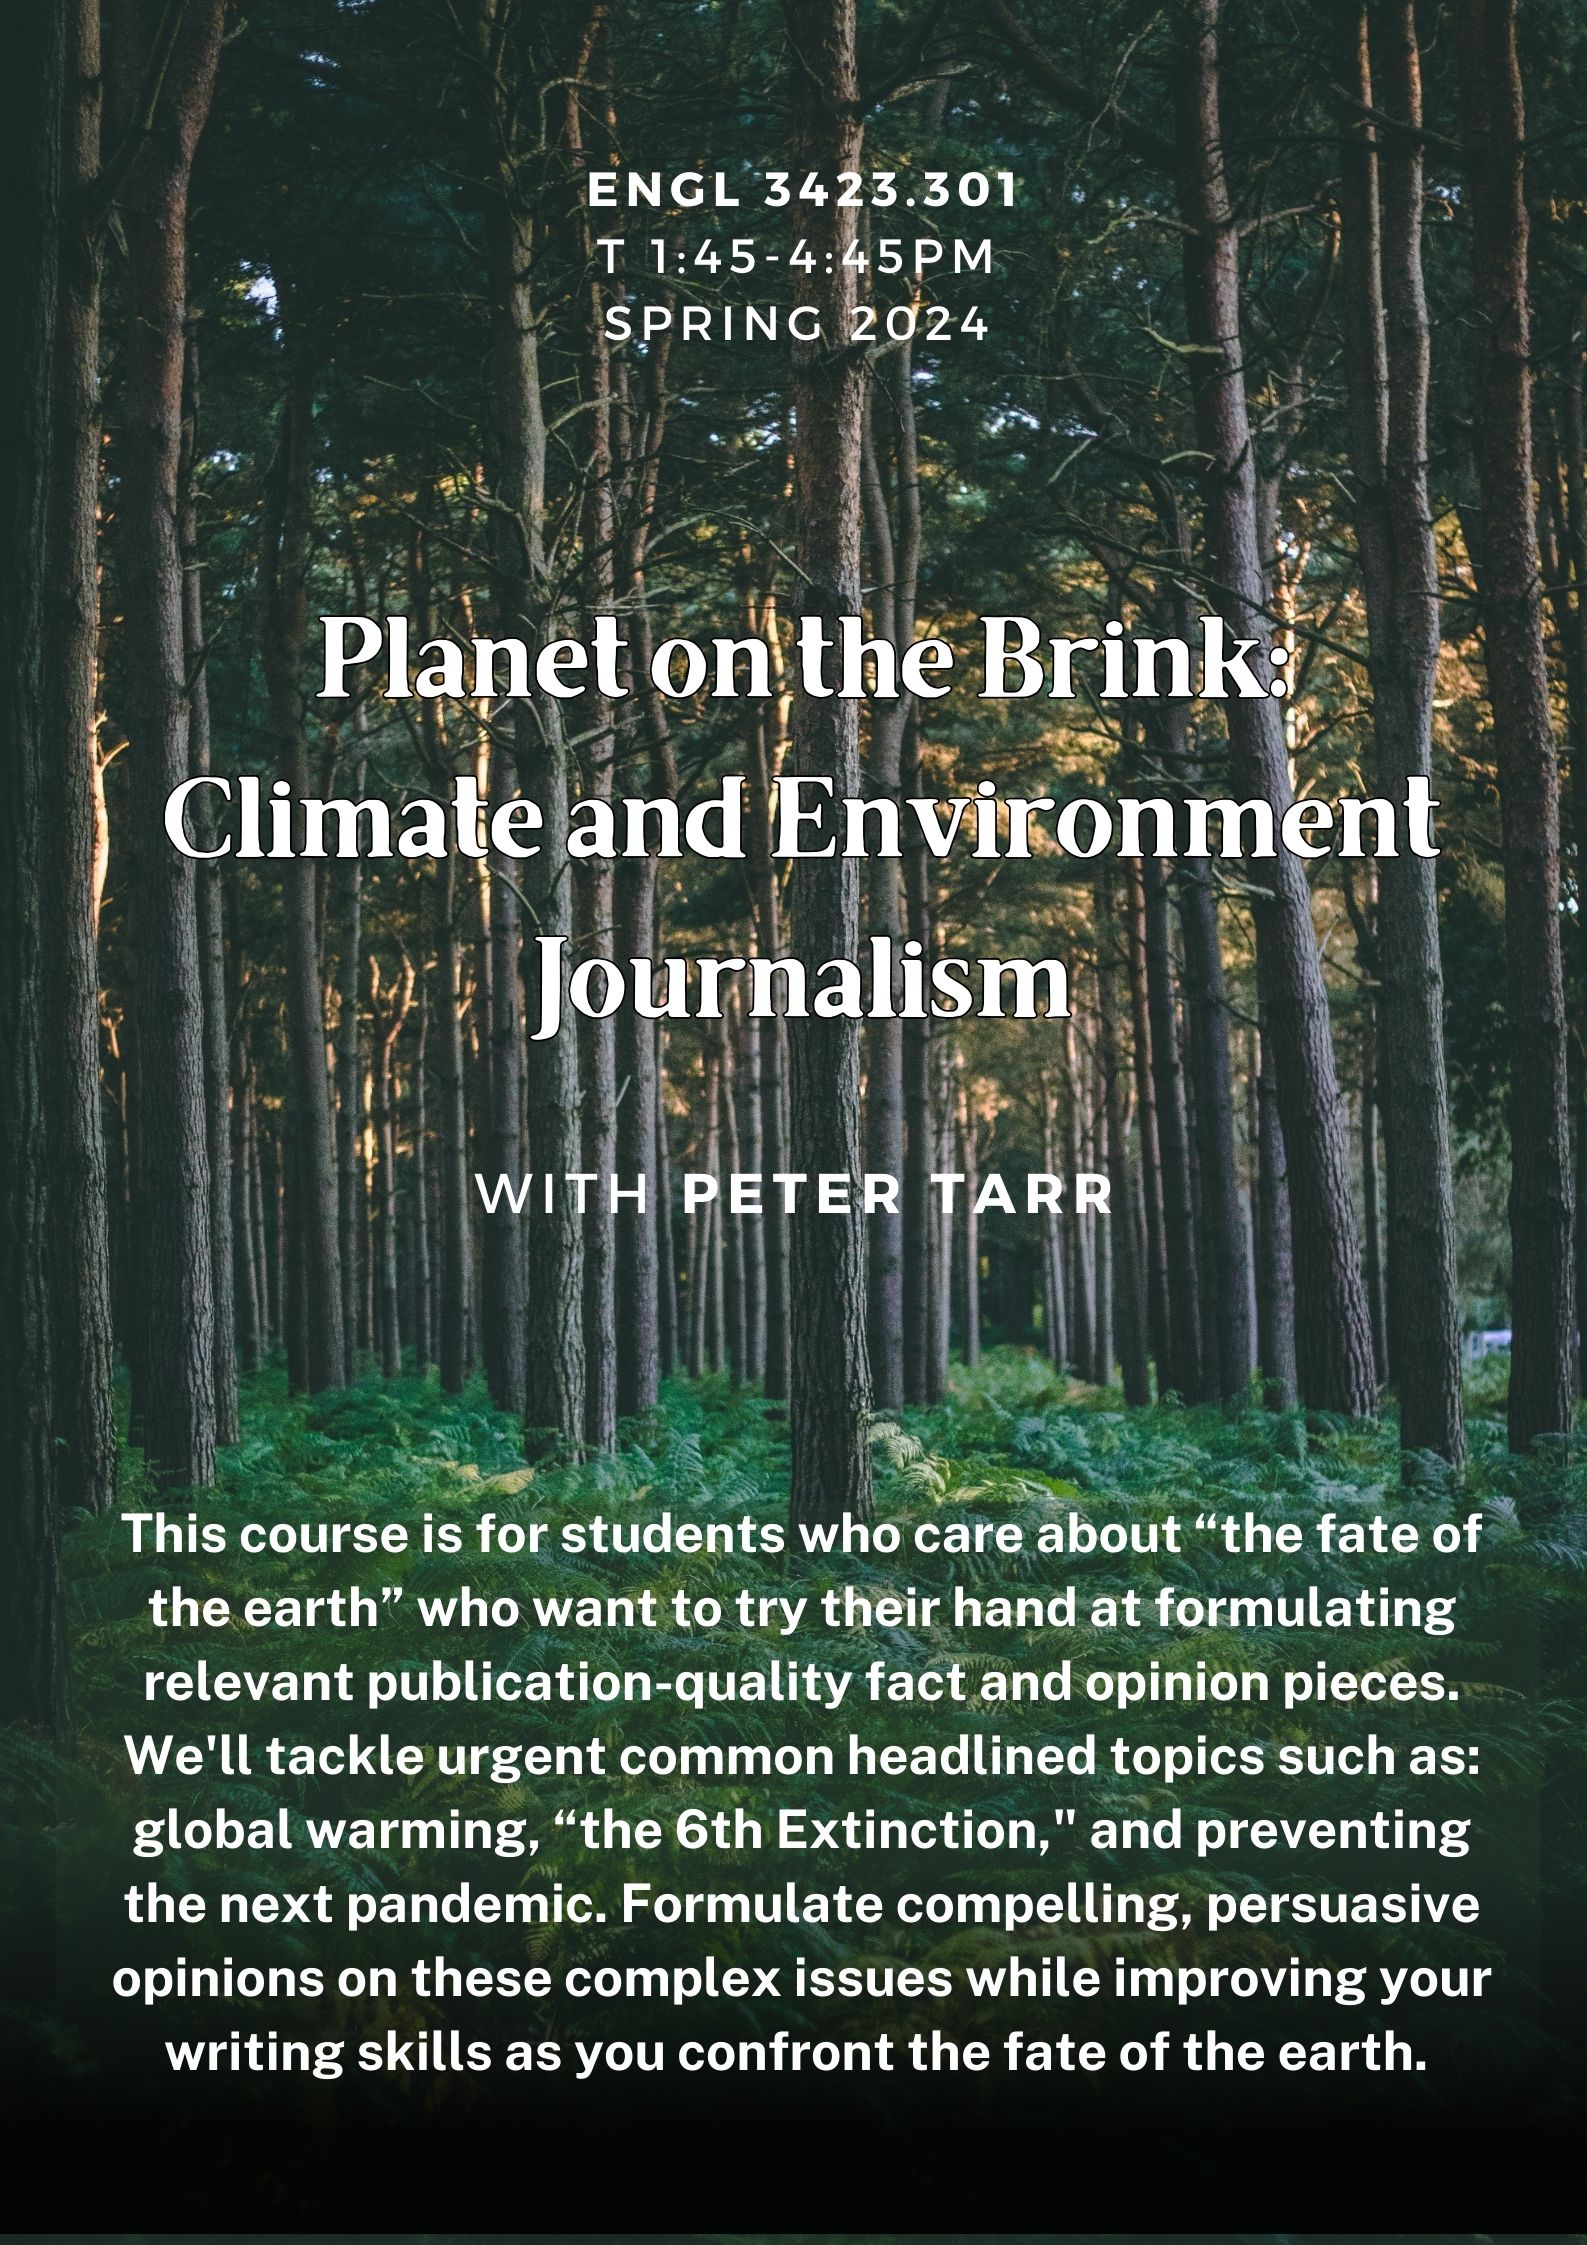 Flyer for course, "Planet on the brink: Climate and environment journalism."